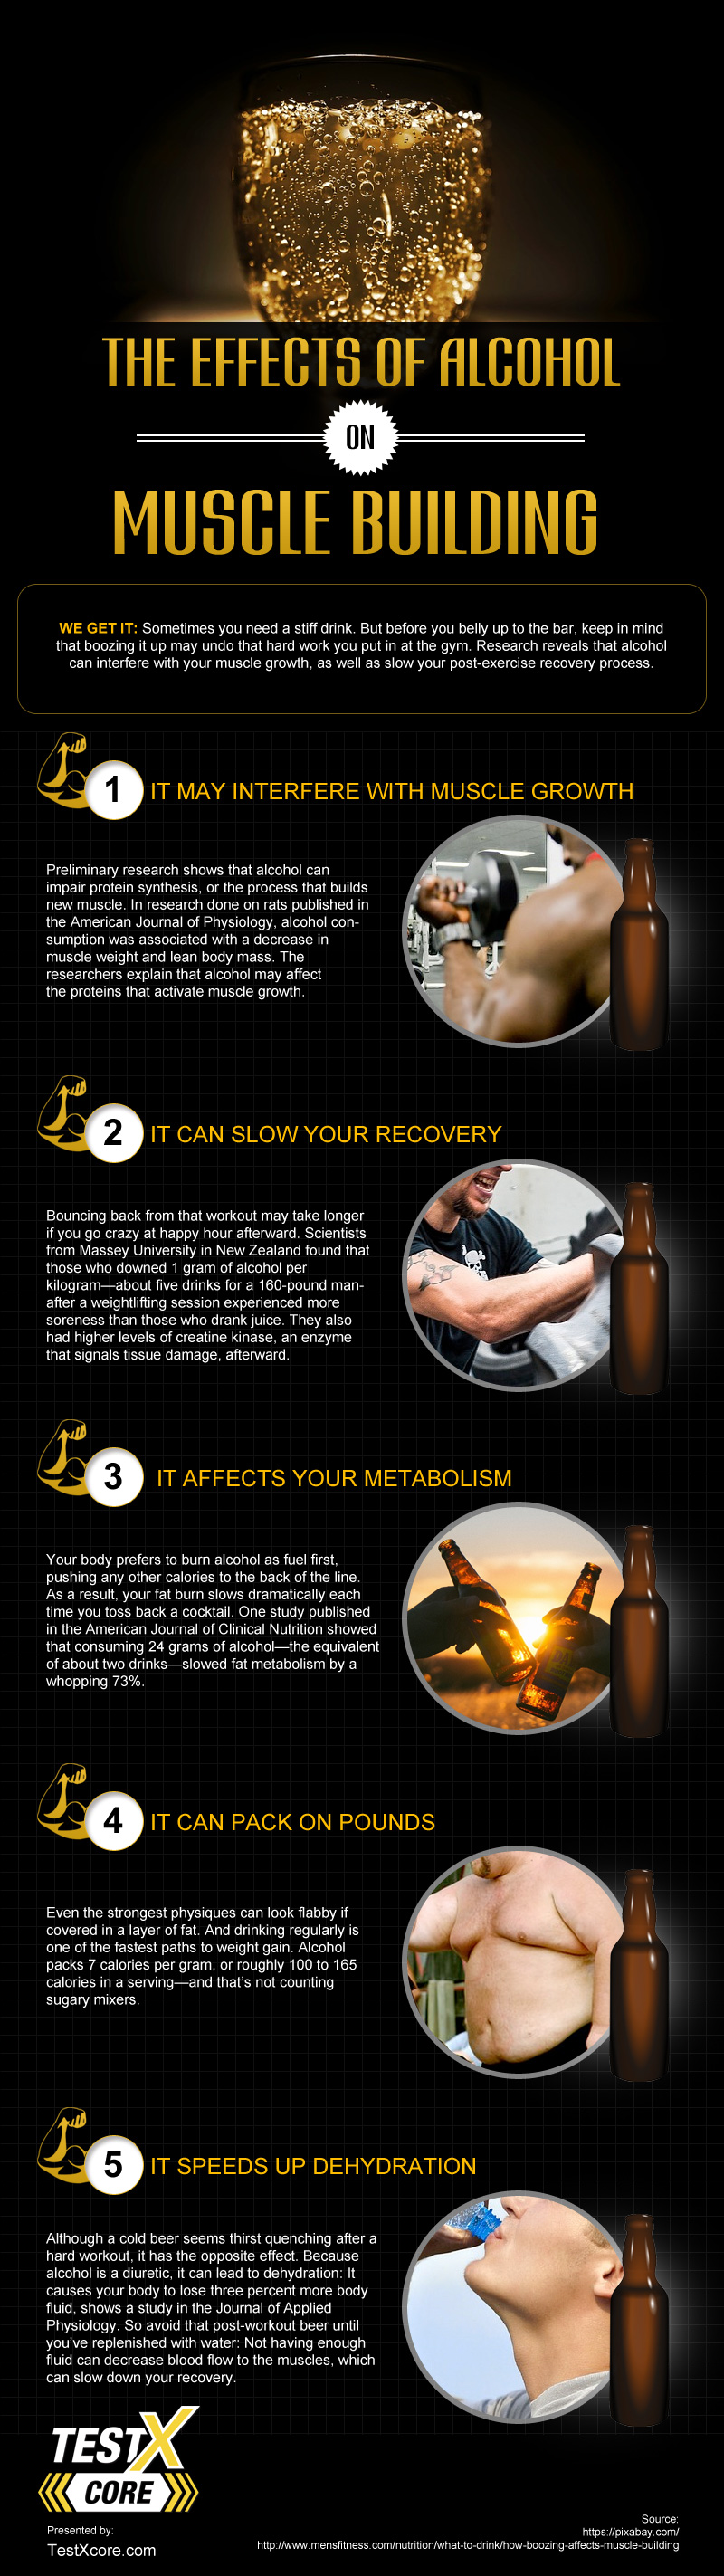 The Effects of Alcohol on Muscle Building